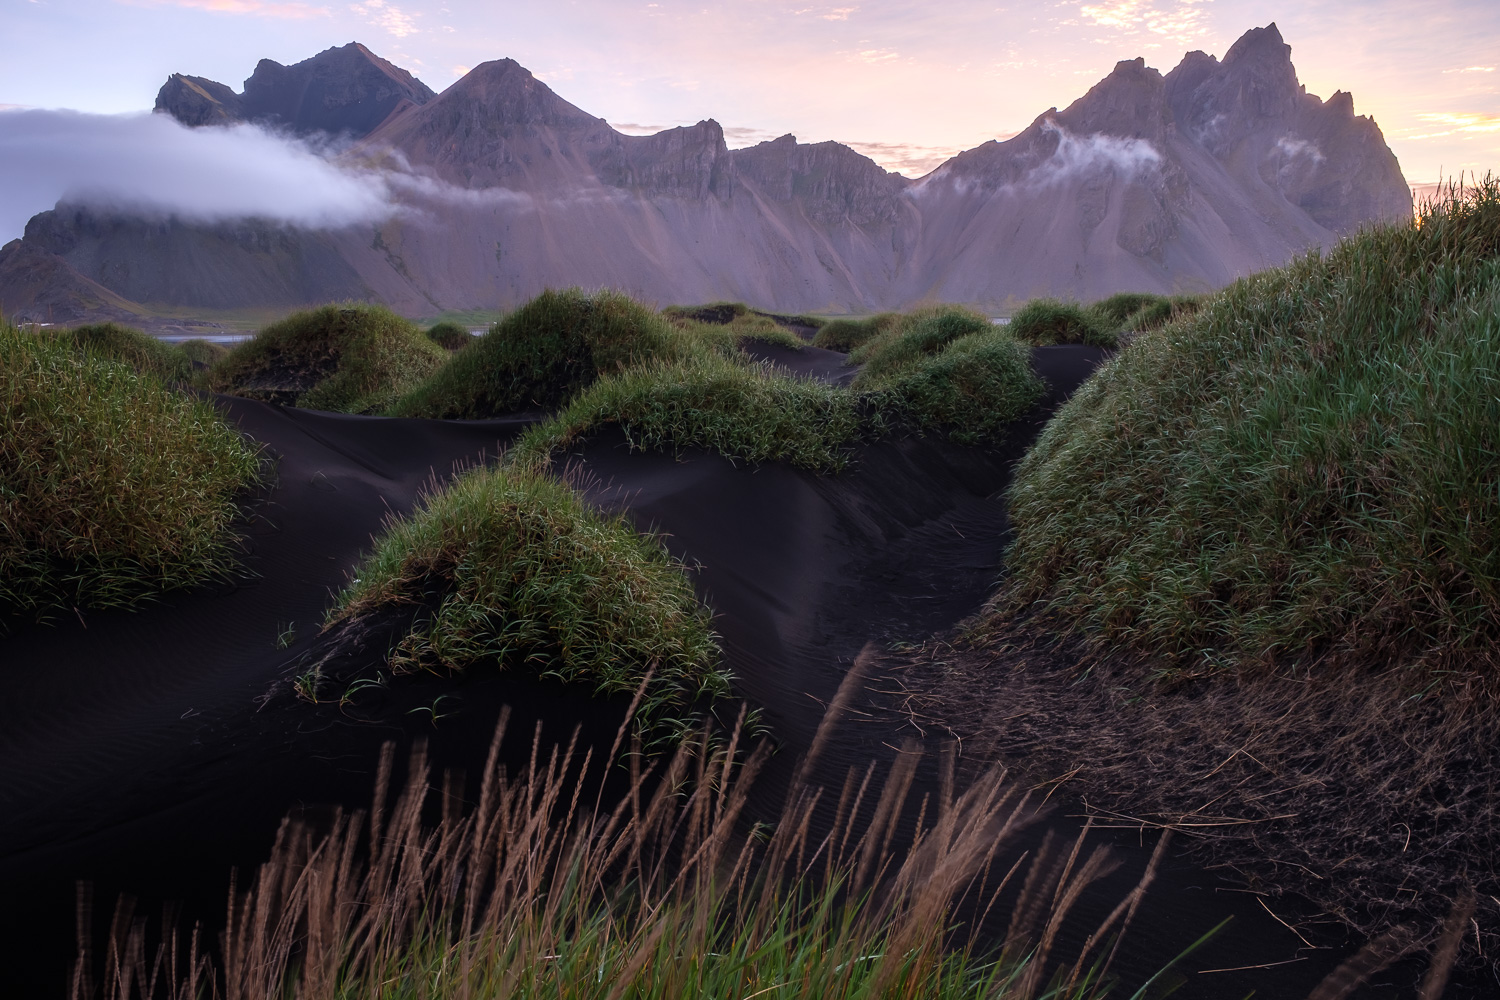  Sand dunes at Stokknses and the famous Vesturhorn mountain at sunrise. 